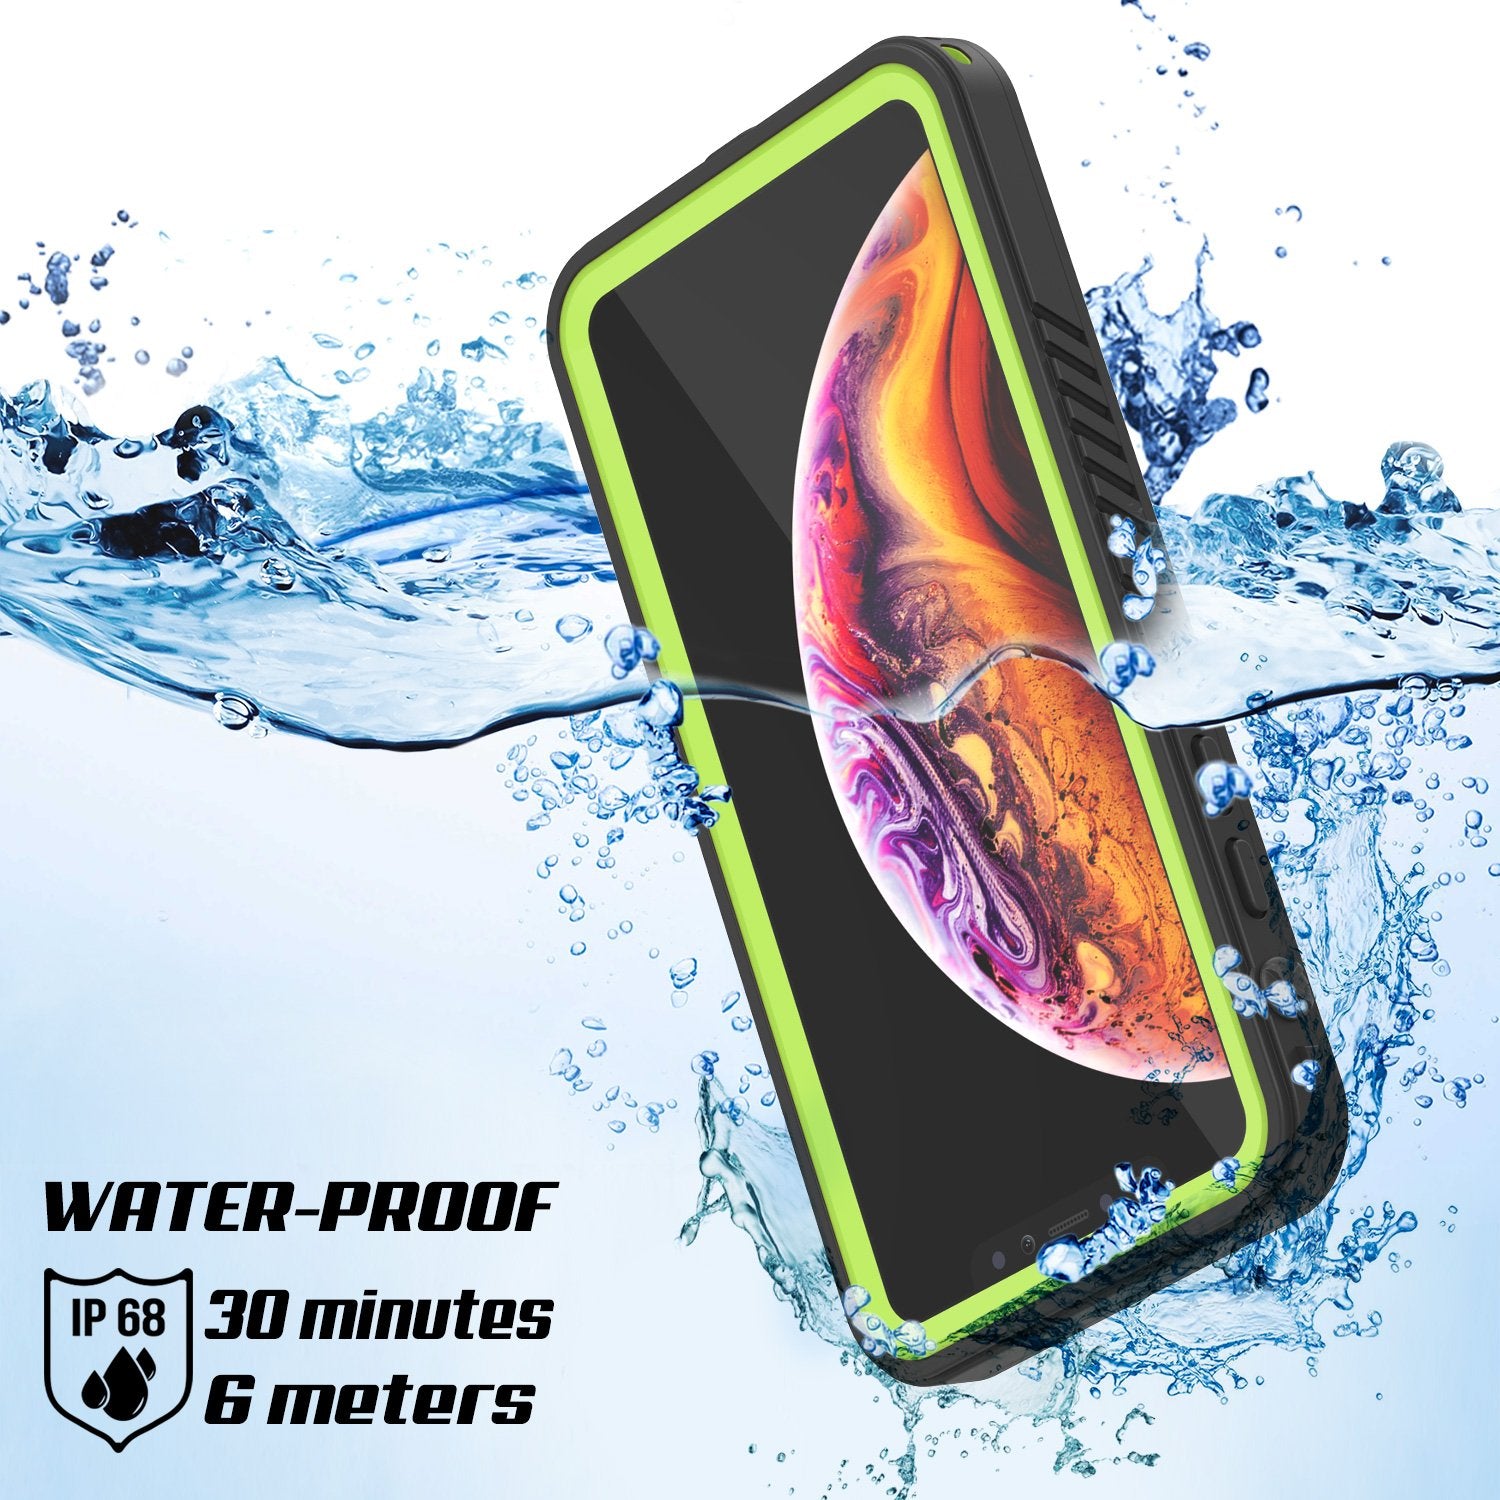 iPhone XR Waterproof Case, Punkcase [Extreme Series] Armor Cover W/ Built In Screen Protector [Light Green]